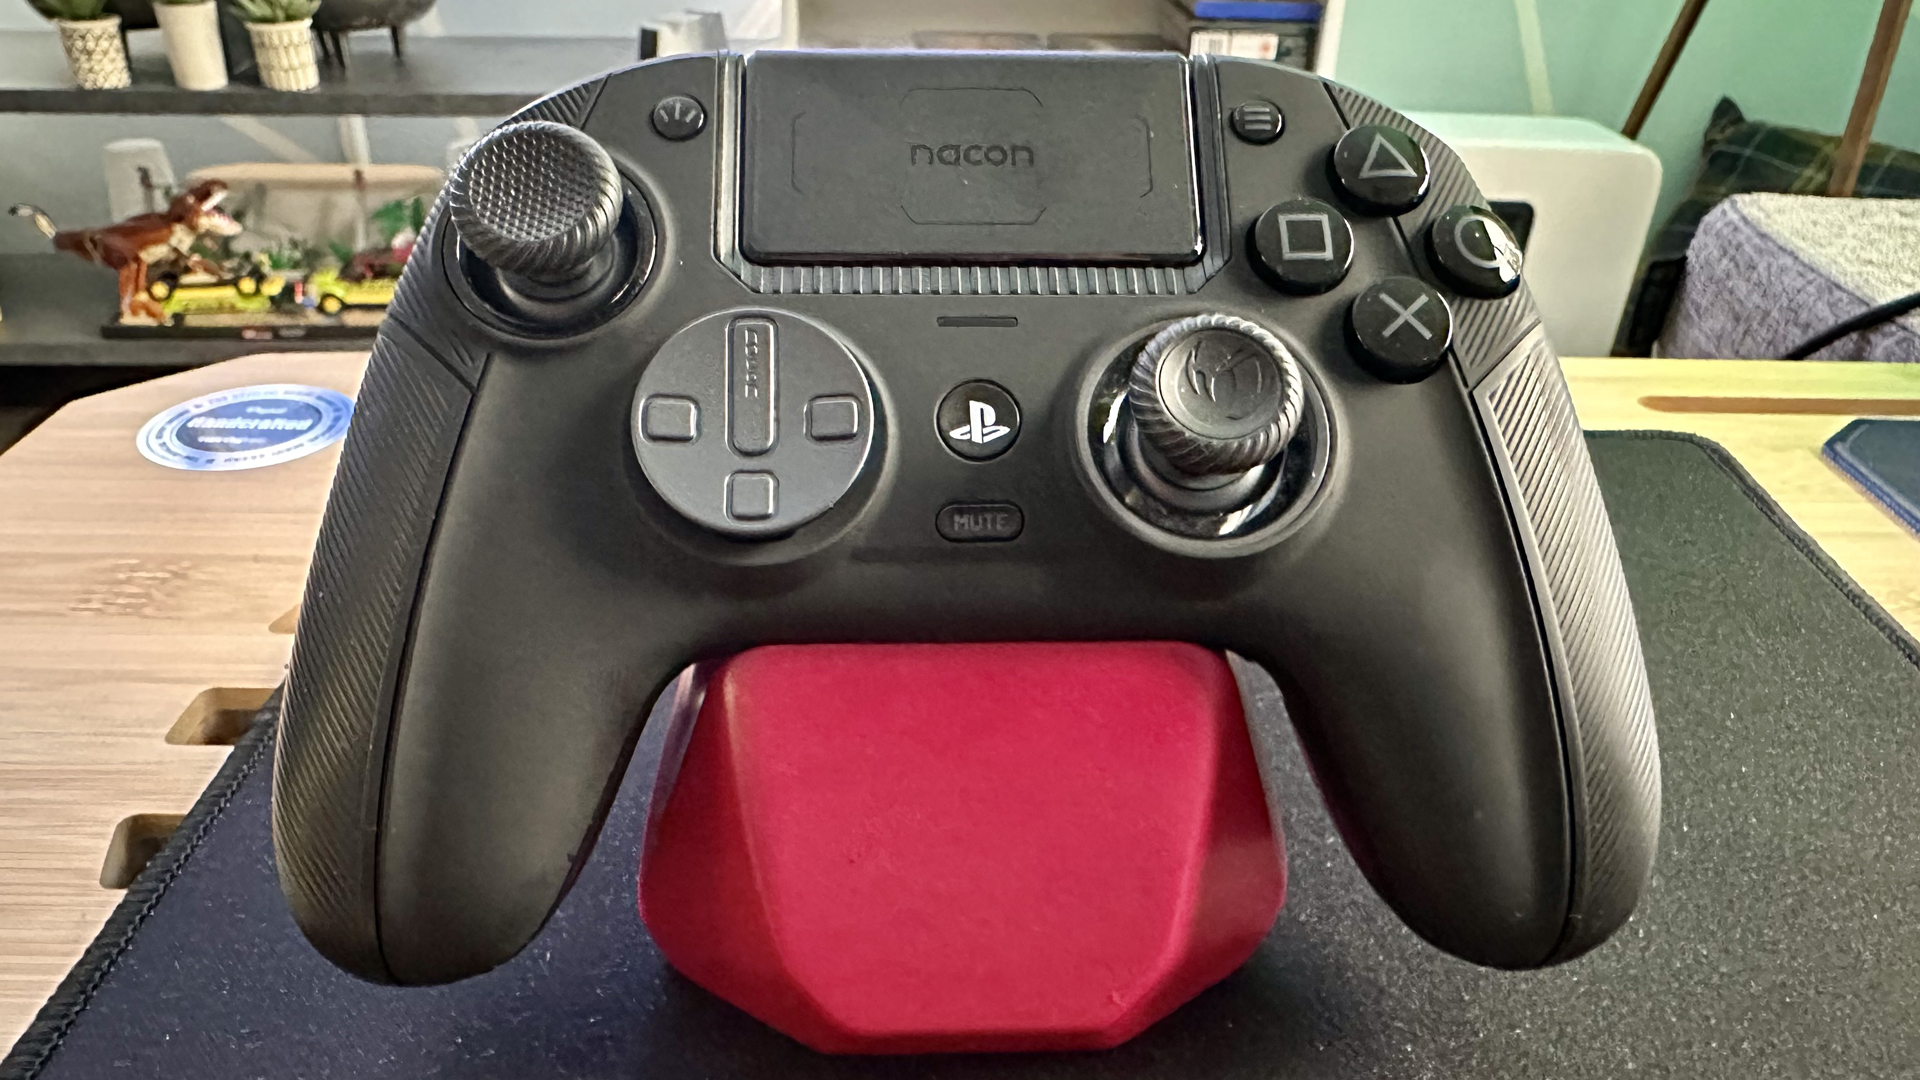 Front shot of the Nacon Revolution 5 Pro controller.